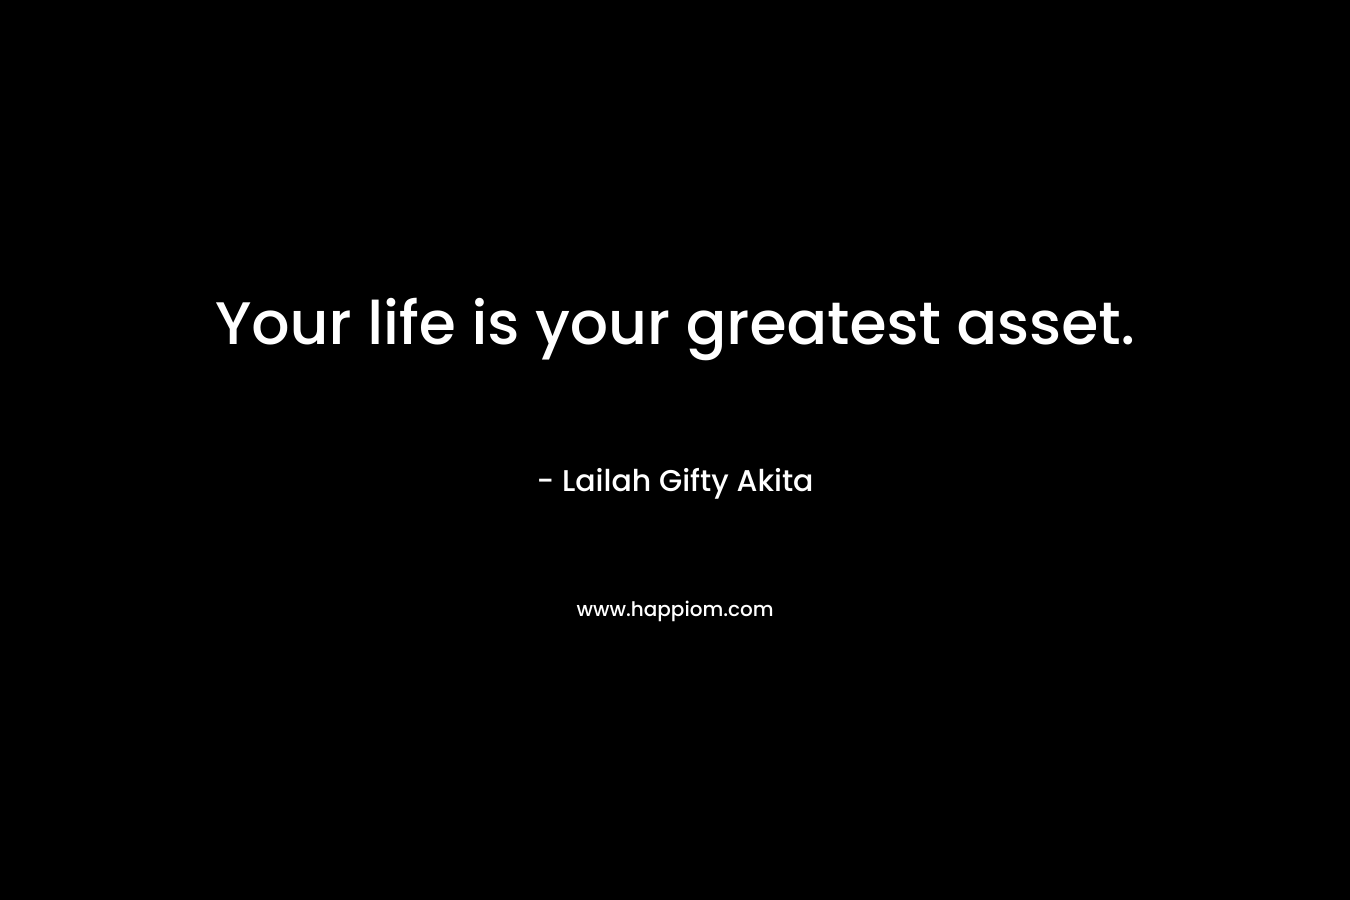 Your life is your greatest asset. – Lailah Gifty Akita